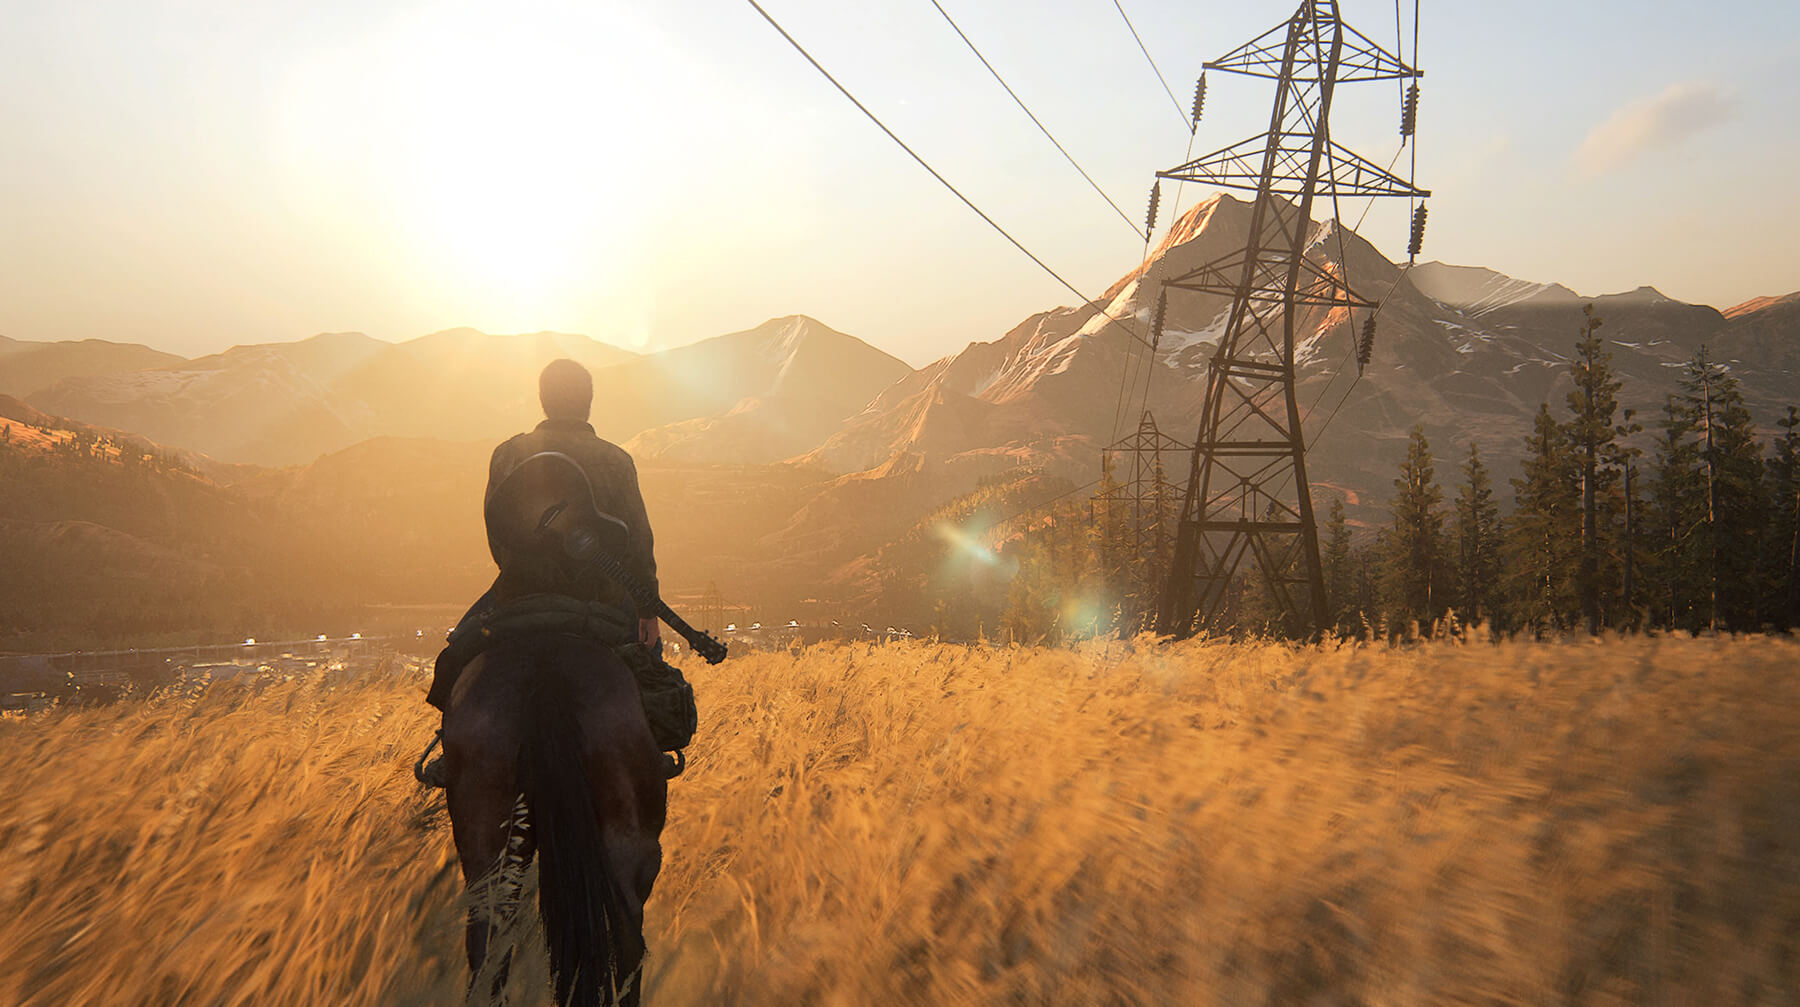 Ellie rides on horseback over a golden field with mountains in the background